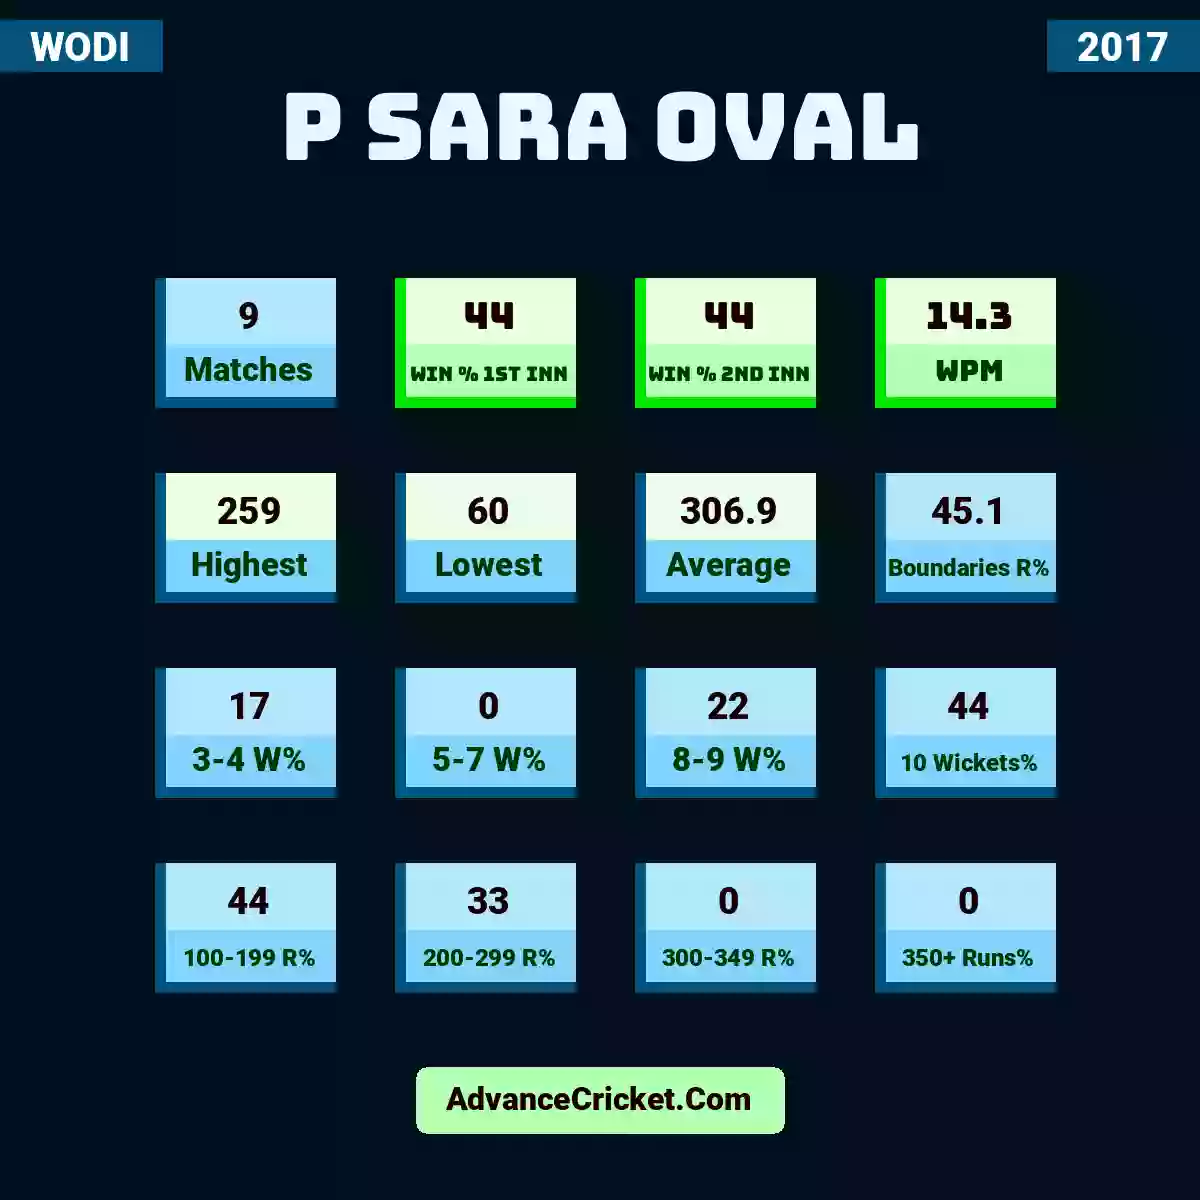 Image showing P Sara Oval with Matches: 9, Win % 1st Inn: 44, Win % 2nd Inn: 44, WPM: 14.3, Highest: 259, Lowest: 60, Average: 306.9, Boundaries R%: 45.1, 3-4 W%: 17, 5-7 W%: 0, 8-9 W%: 22, 10 Wickets%: 44, 100-199 R%: 44, 200-299 R%: 33, 300-349 R%: 0, 350+ Runs%: 0.